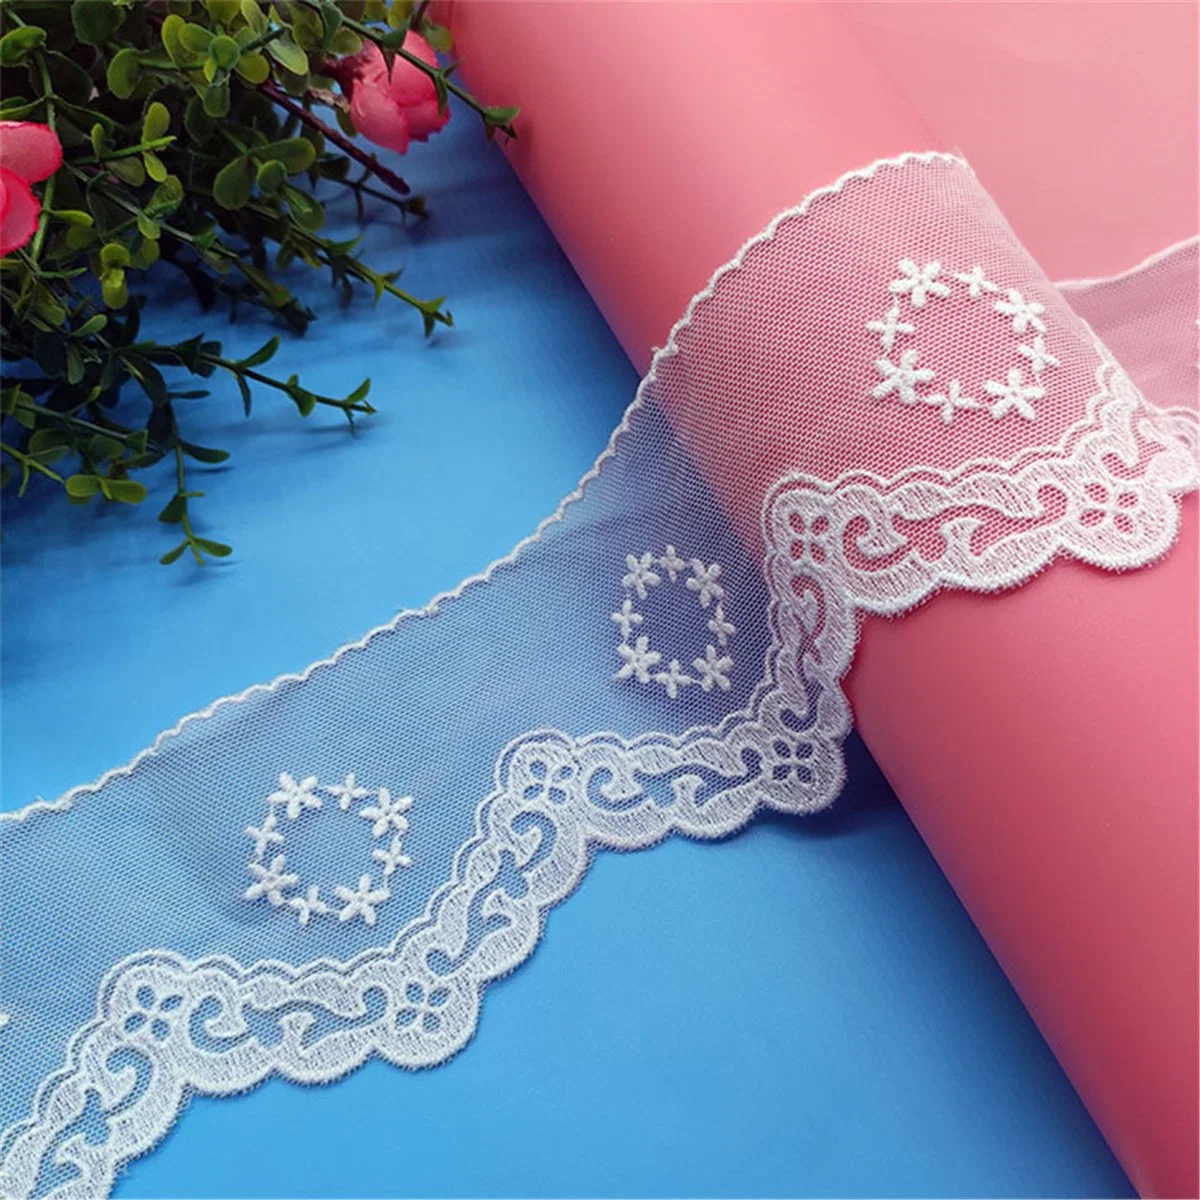 Home Textile Lace Fabric Embroidery Lace for Garment Accessories Wedding Dress